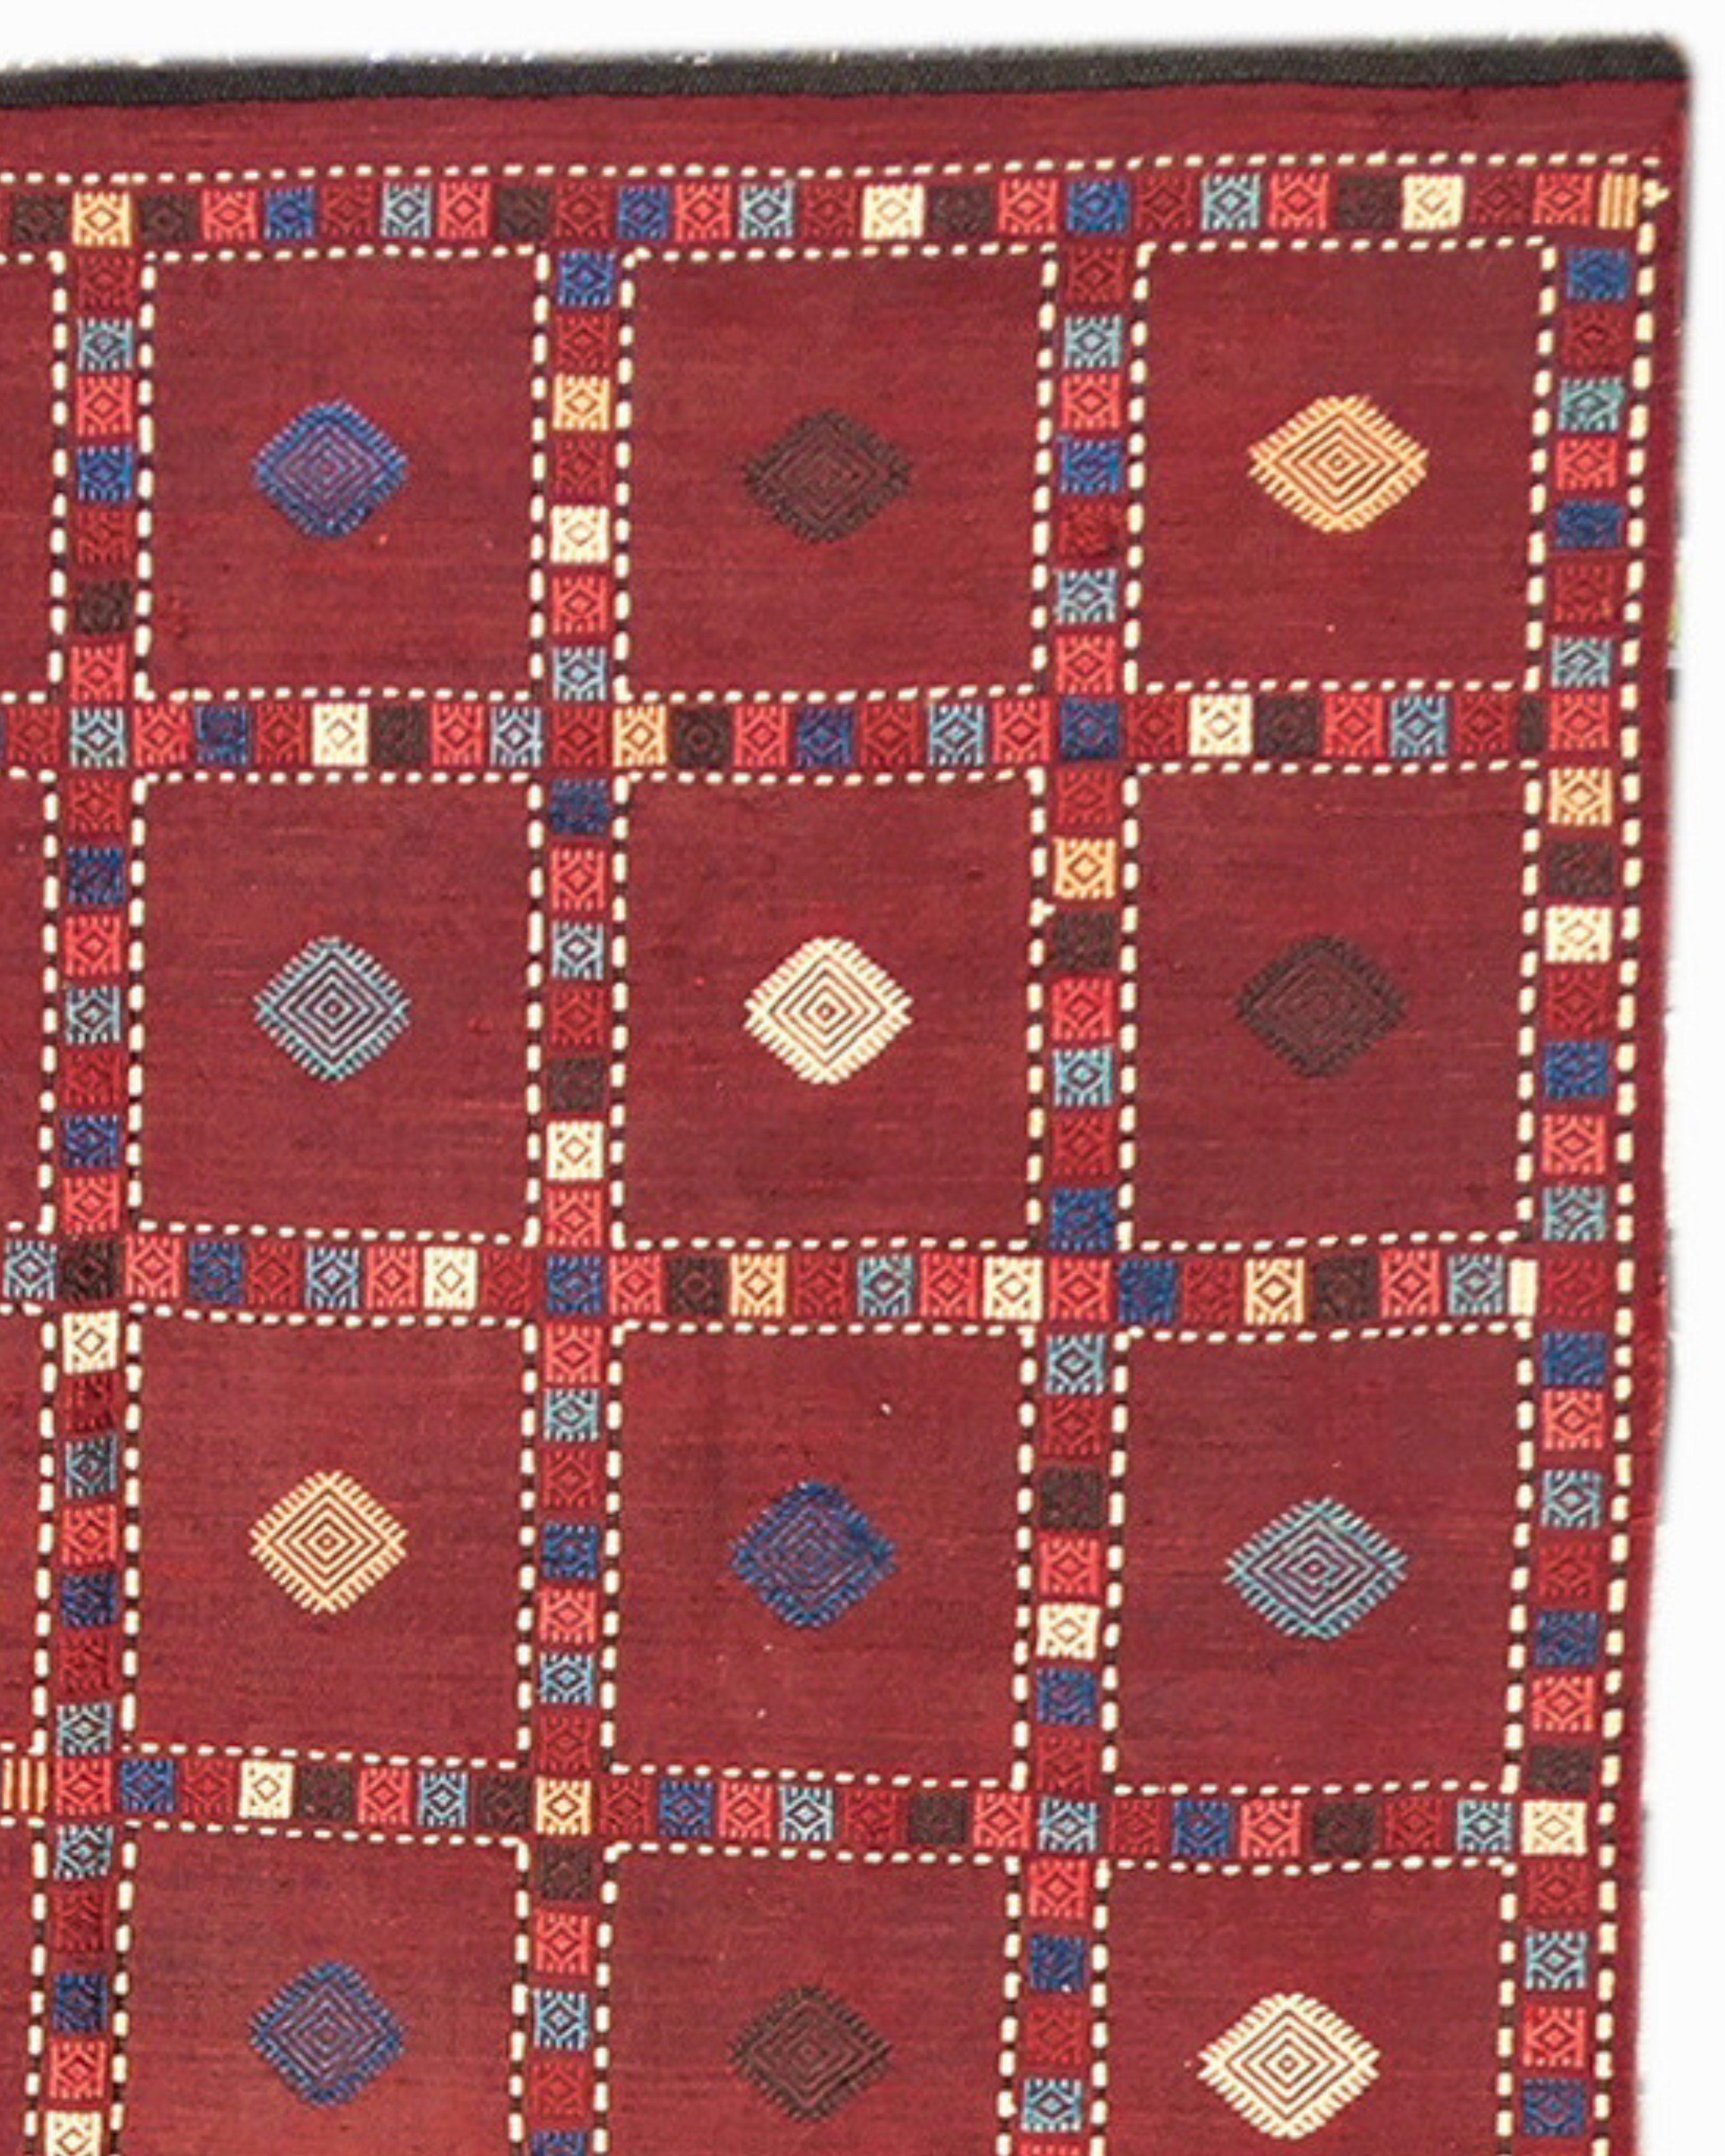 Antique Caucasian Zili Cover, Late 19th Century

This large flat-woven Caucasian Zili cover was most likely woven in the Karabagh region. Using a dark black wool warp and madder-red wool weft, a deep Kilim ground is created. Supplementary wrapping